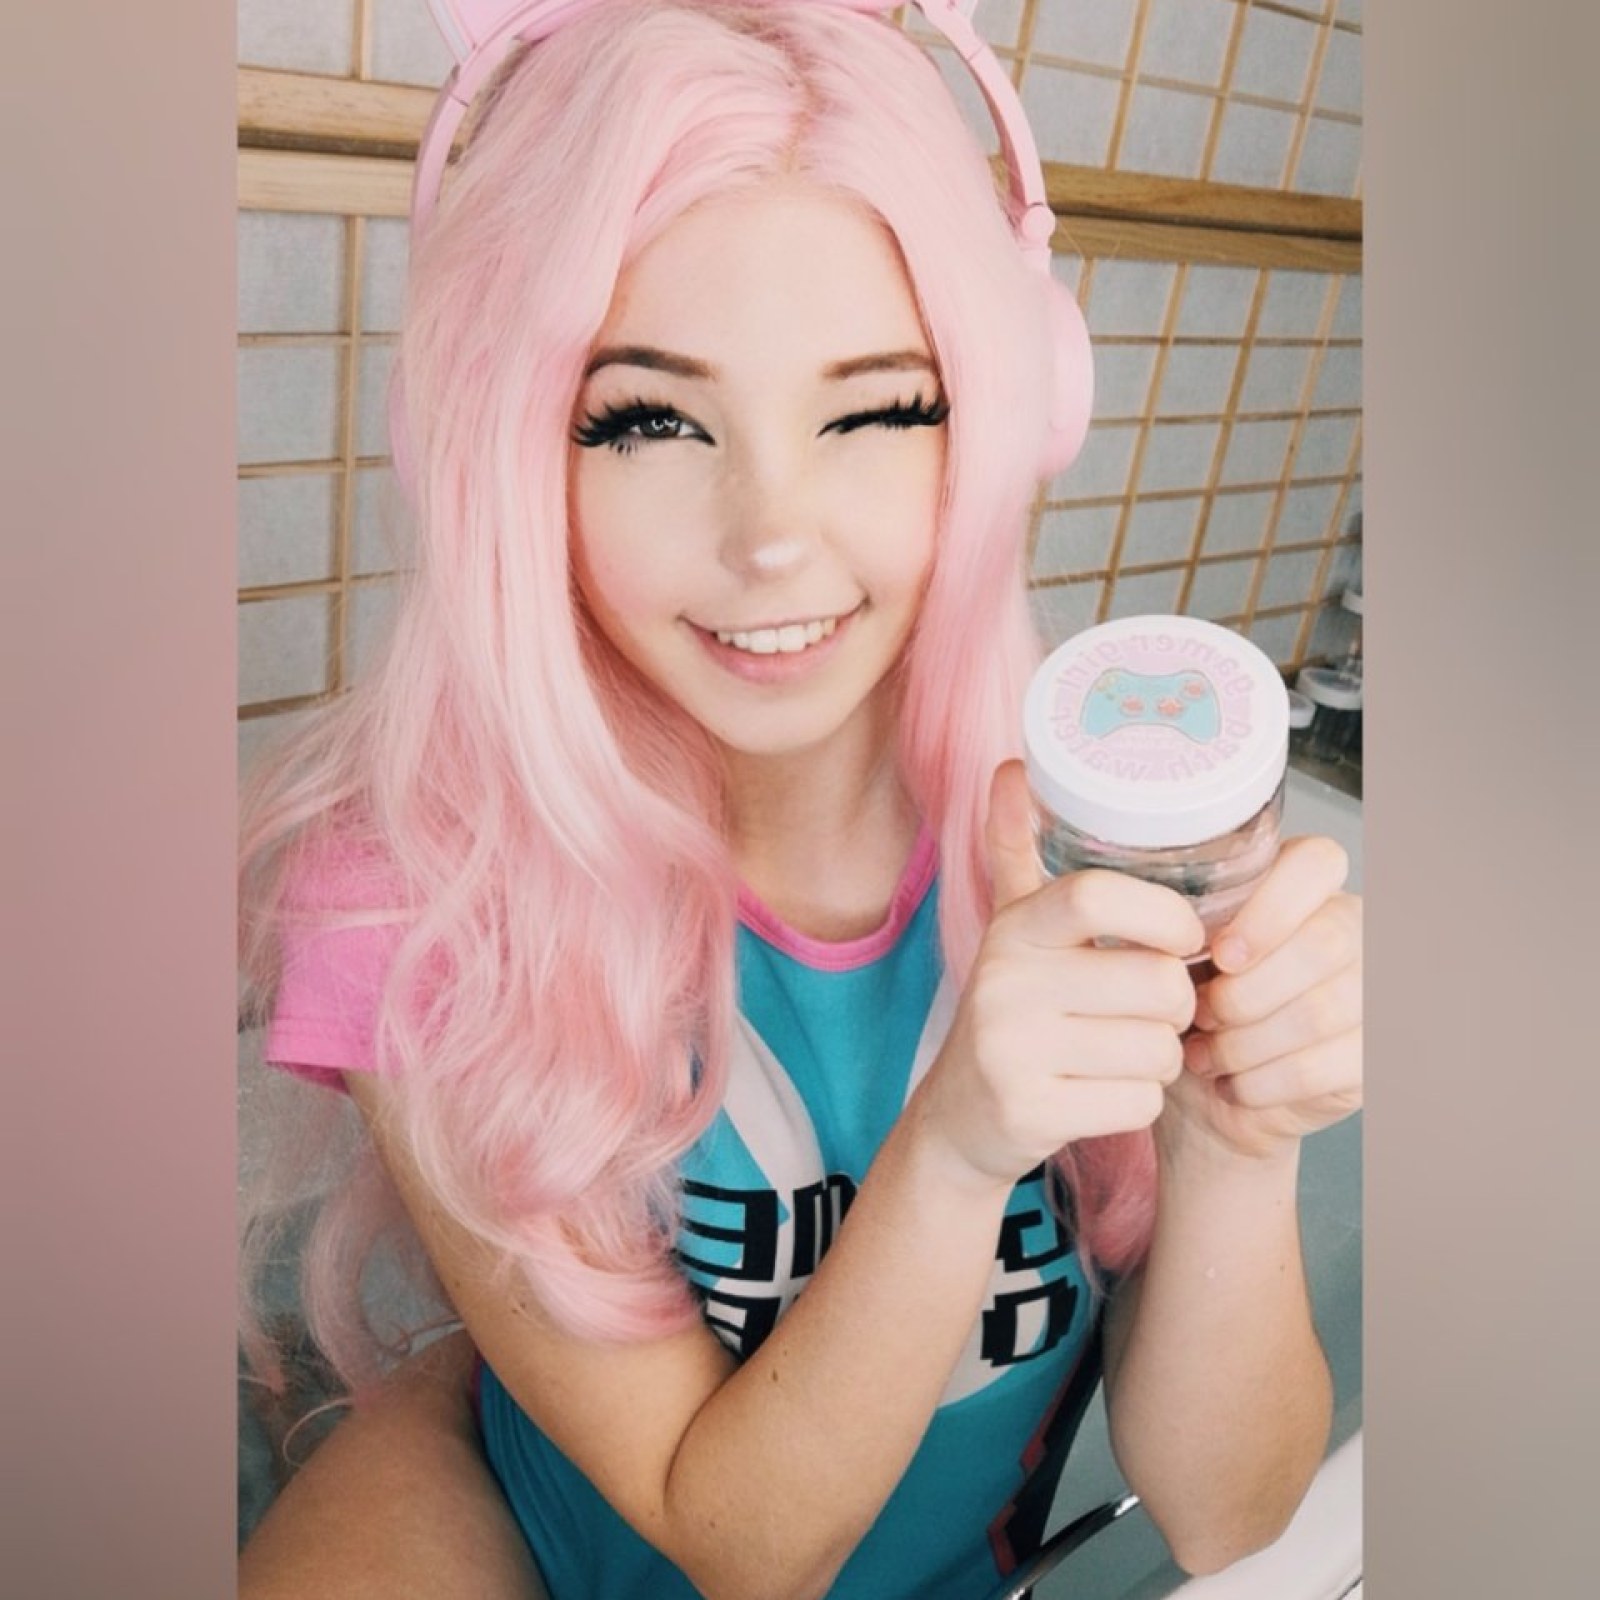 How much money does Belle Delphine make?